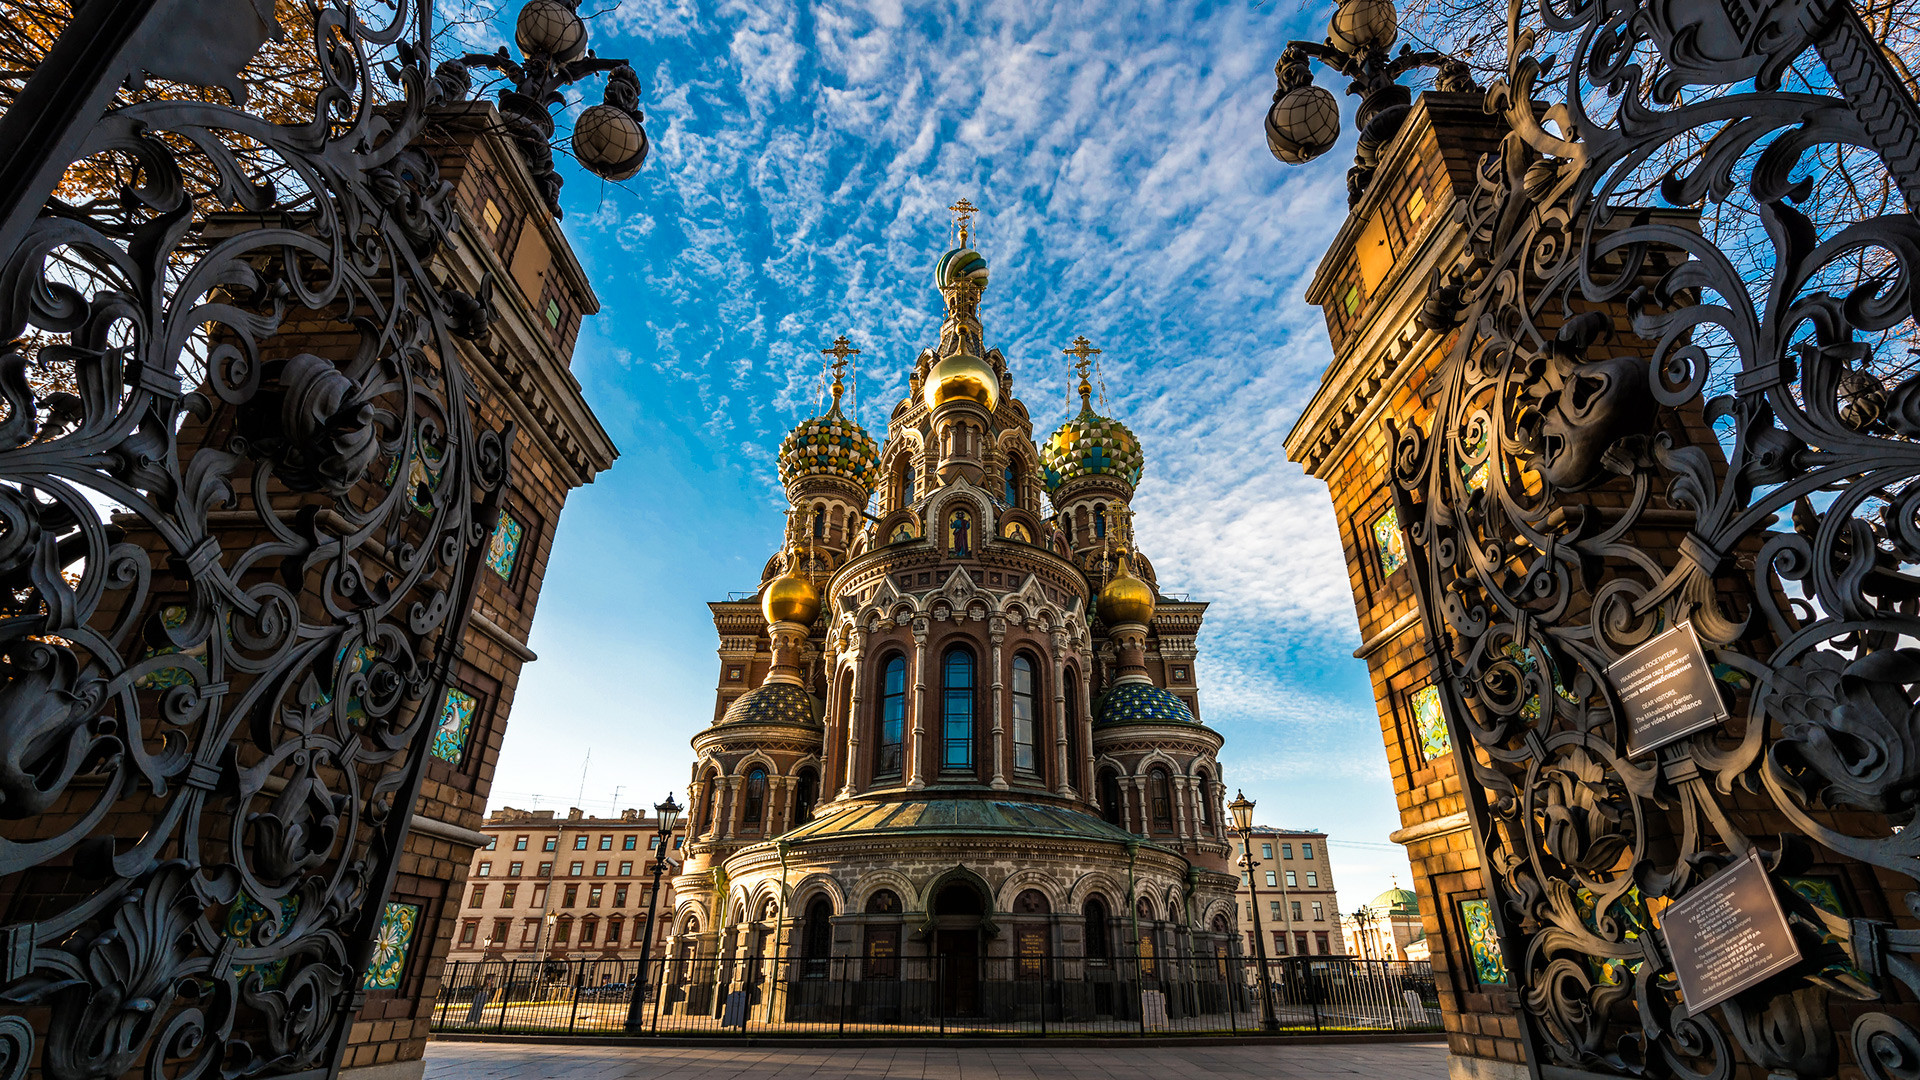 The Church of the Savior on Spilled Blood, one of the most iconic symbols of St. Petersburg.